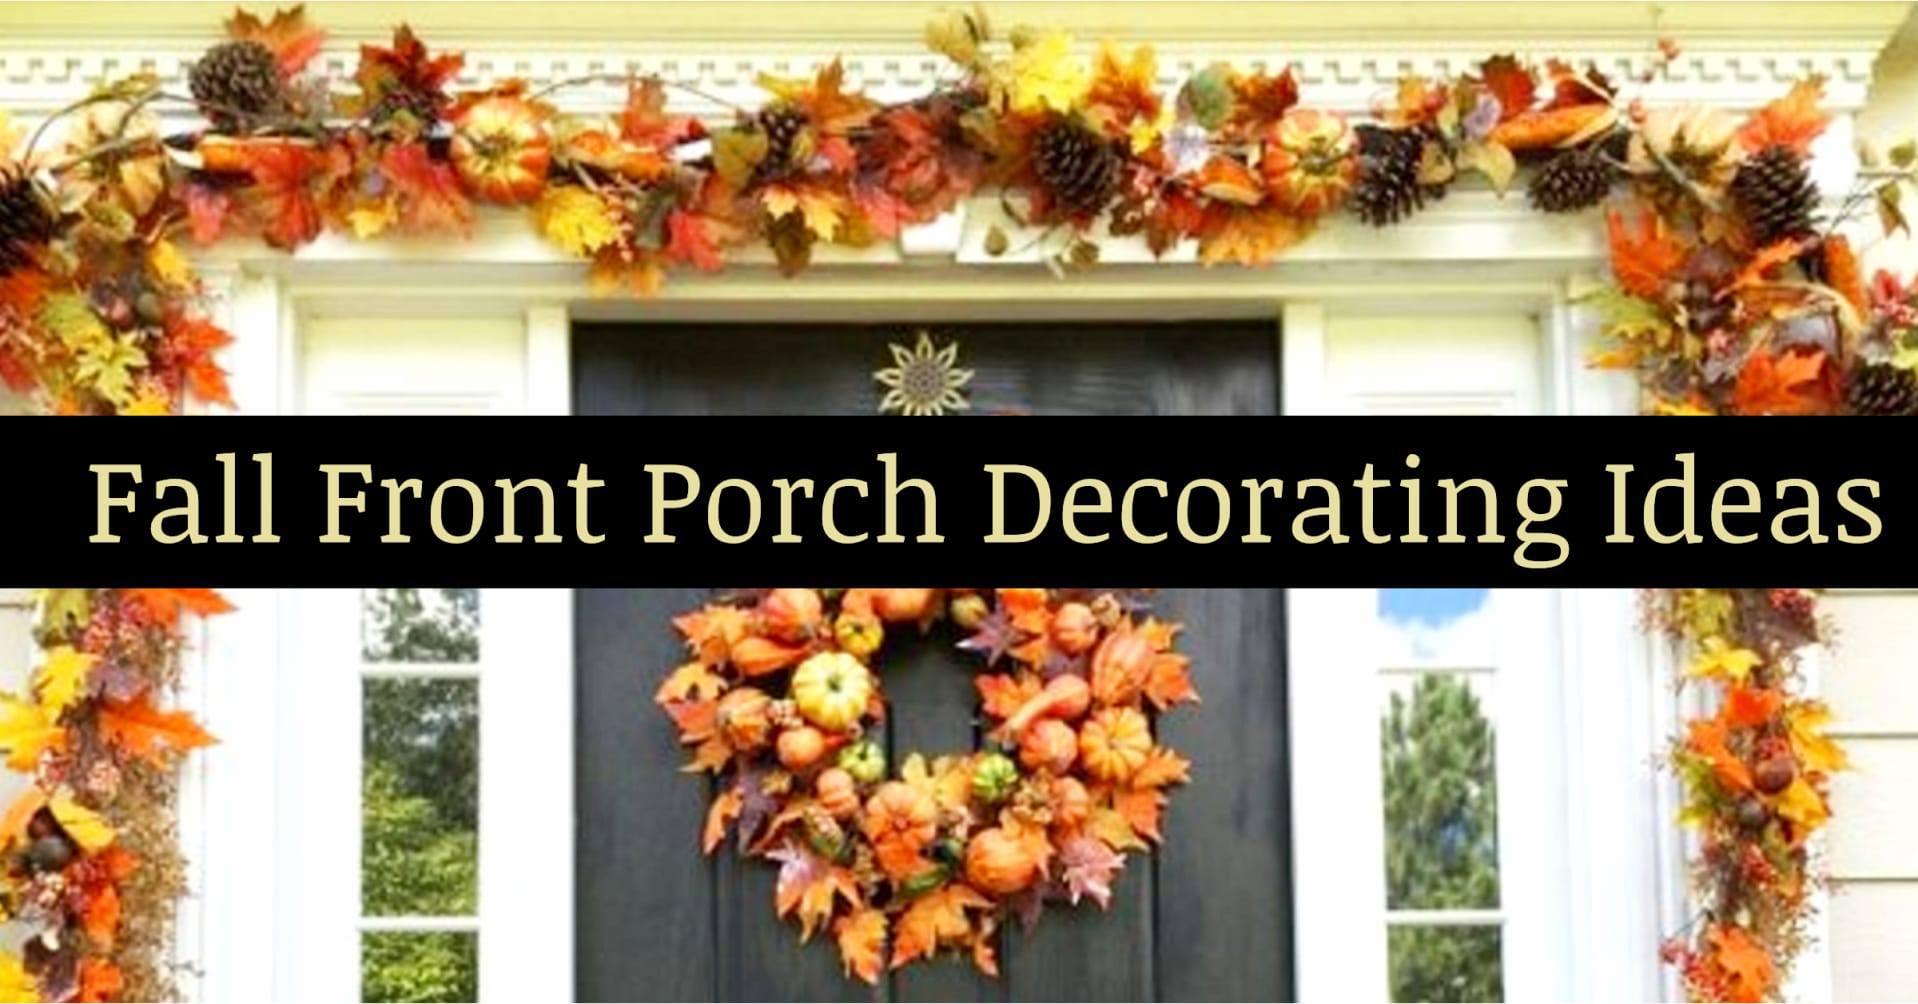 Fall decor ideas for your front porch - decorating for fall on a budget